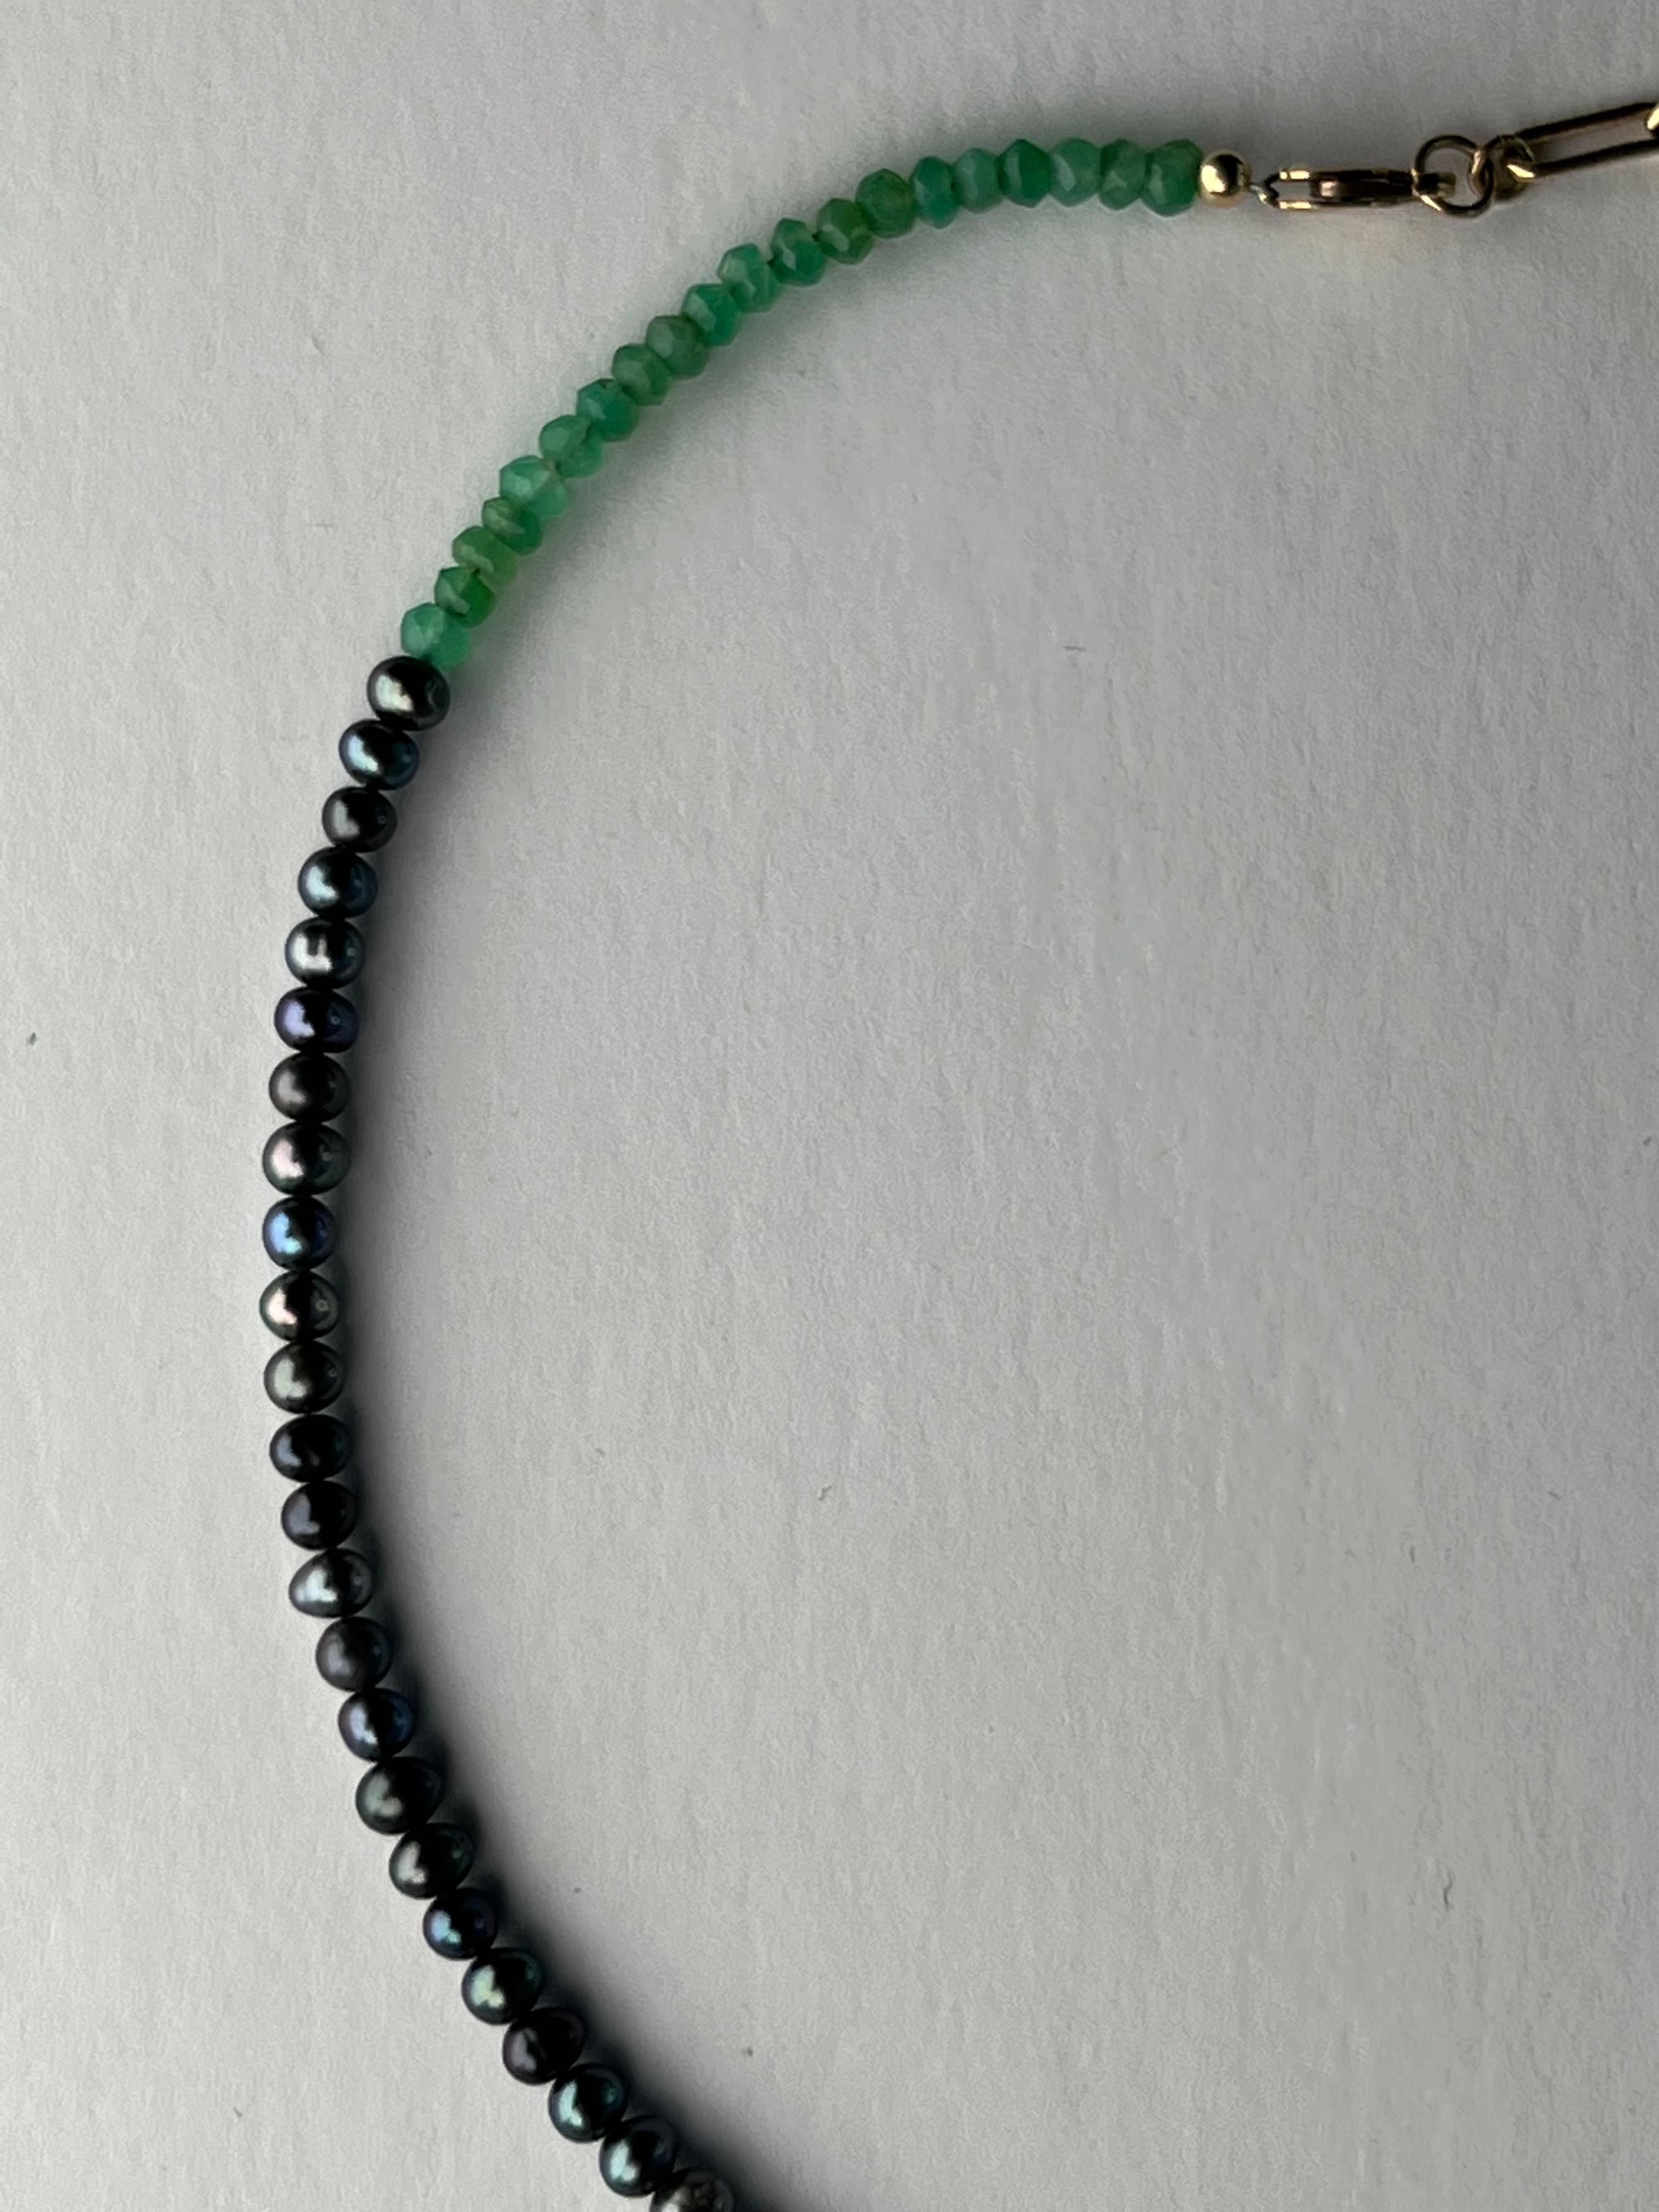 Black Pearl Chrysoprase Choker Necklace Chain J Dauphin For Sale 3